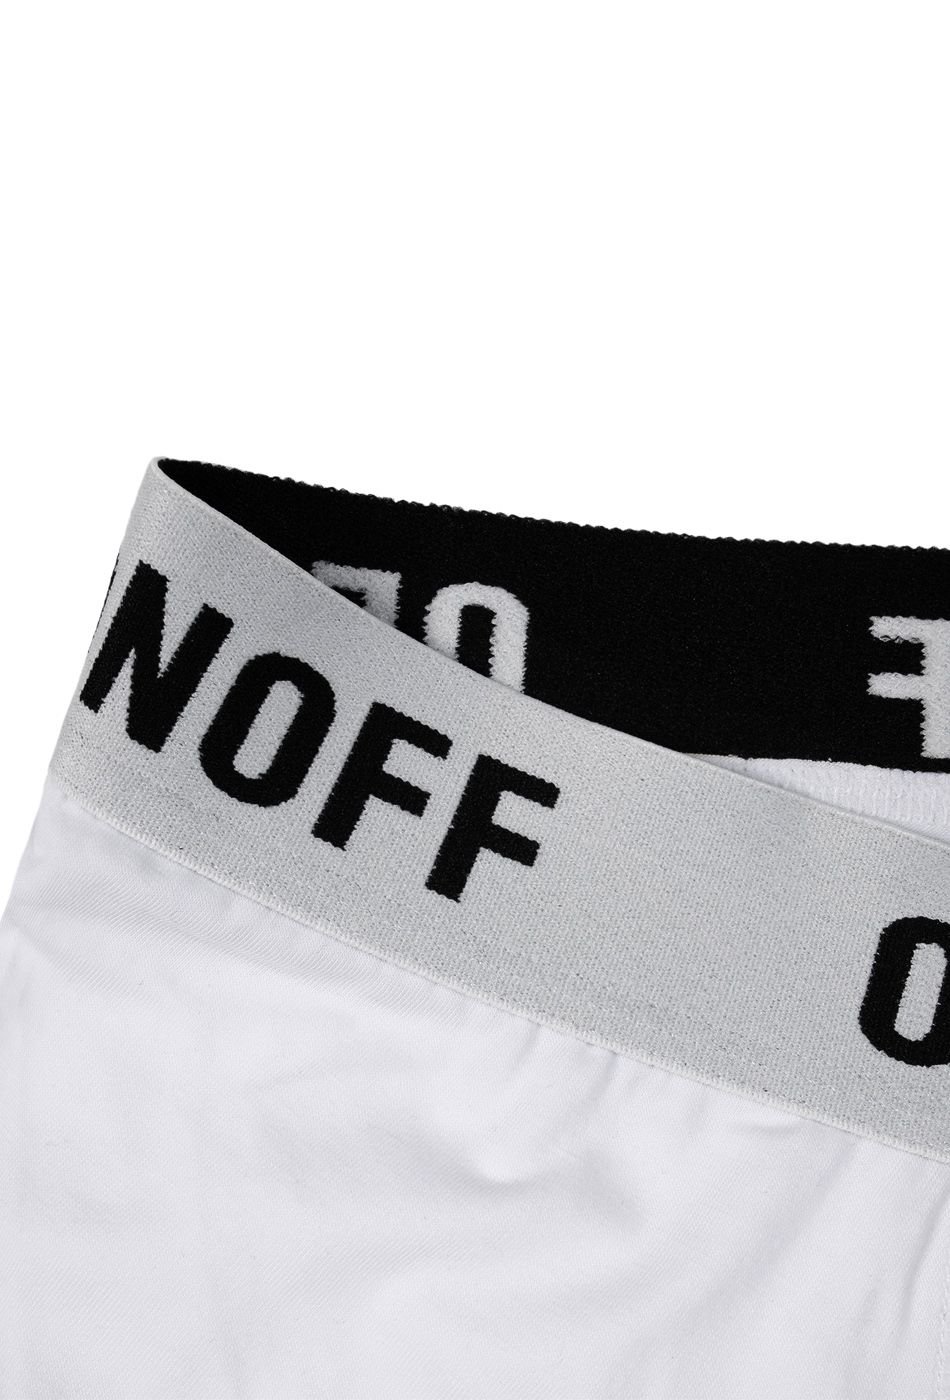 OFFONOFF BOXER PACK / WHITE – OFFONOFFCLUB